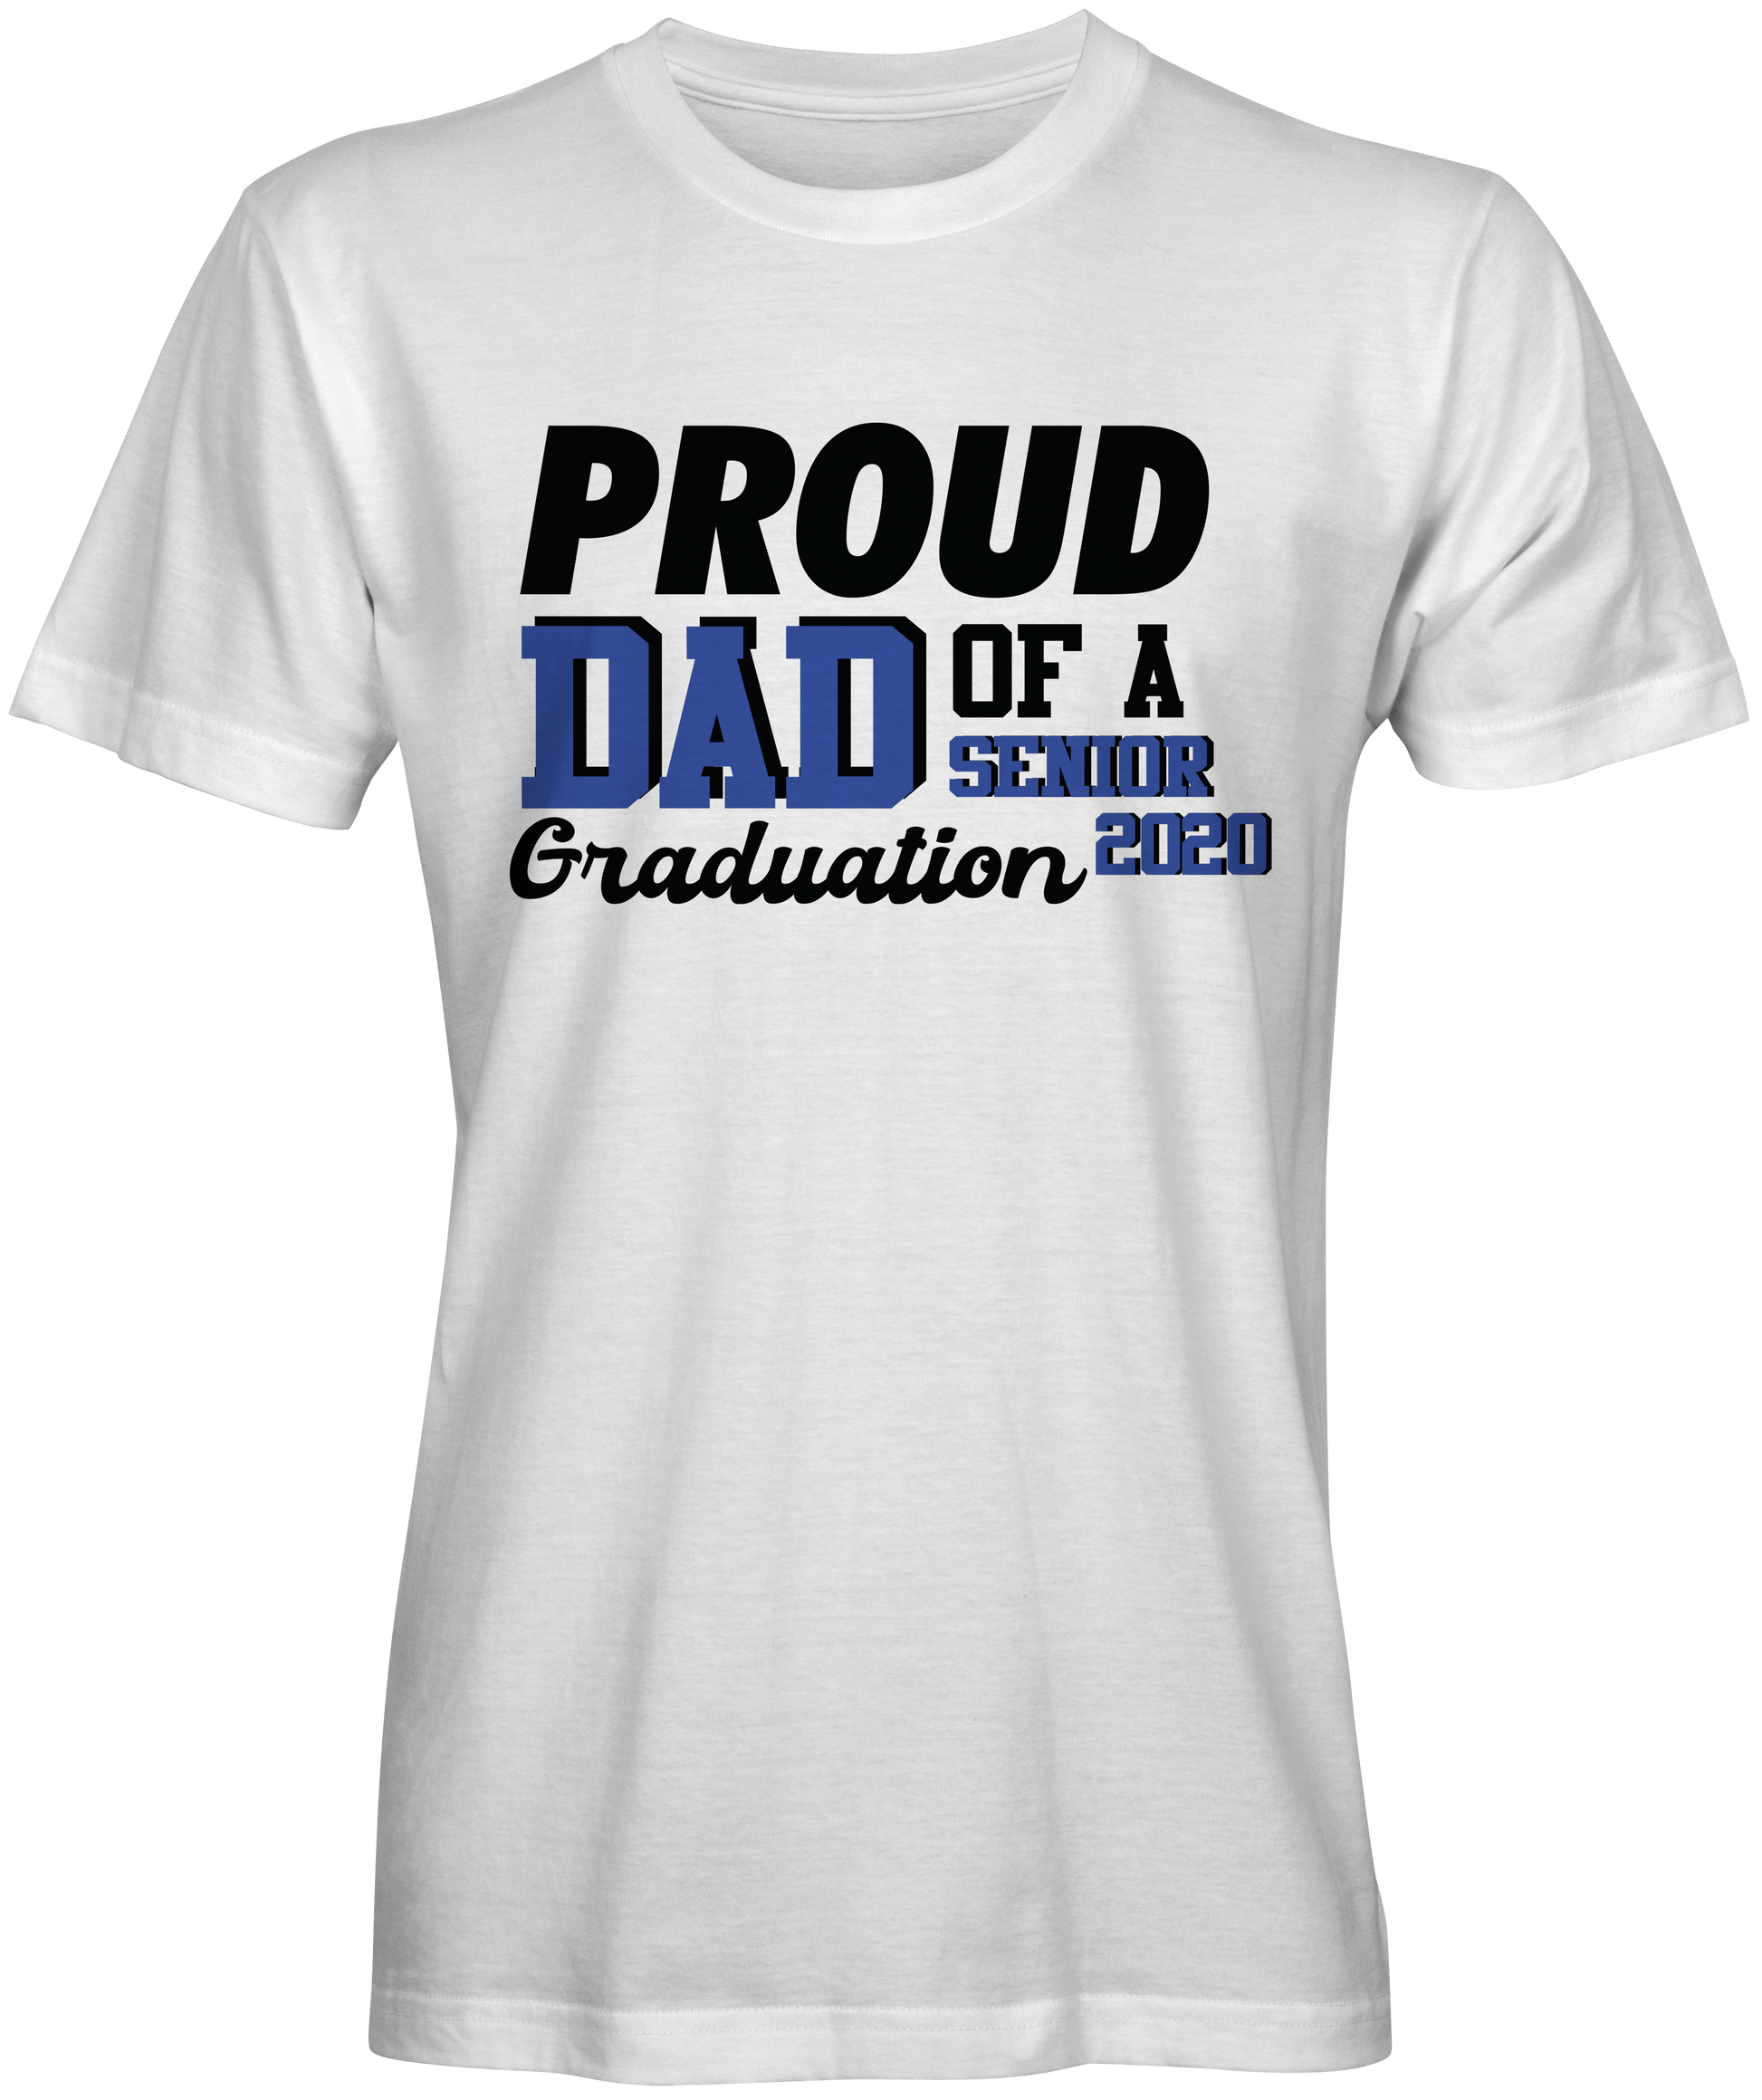 Proud Father of Graduate T-shirts